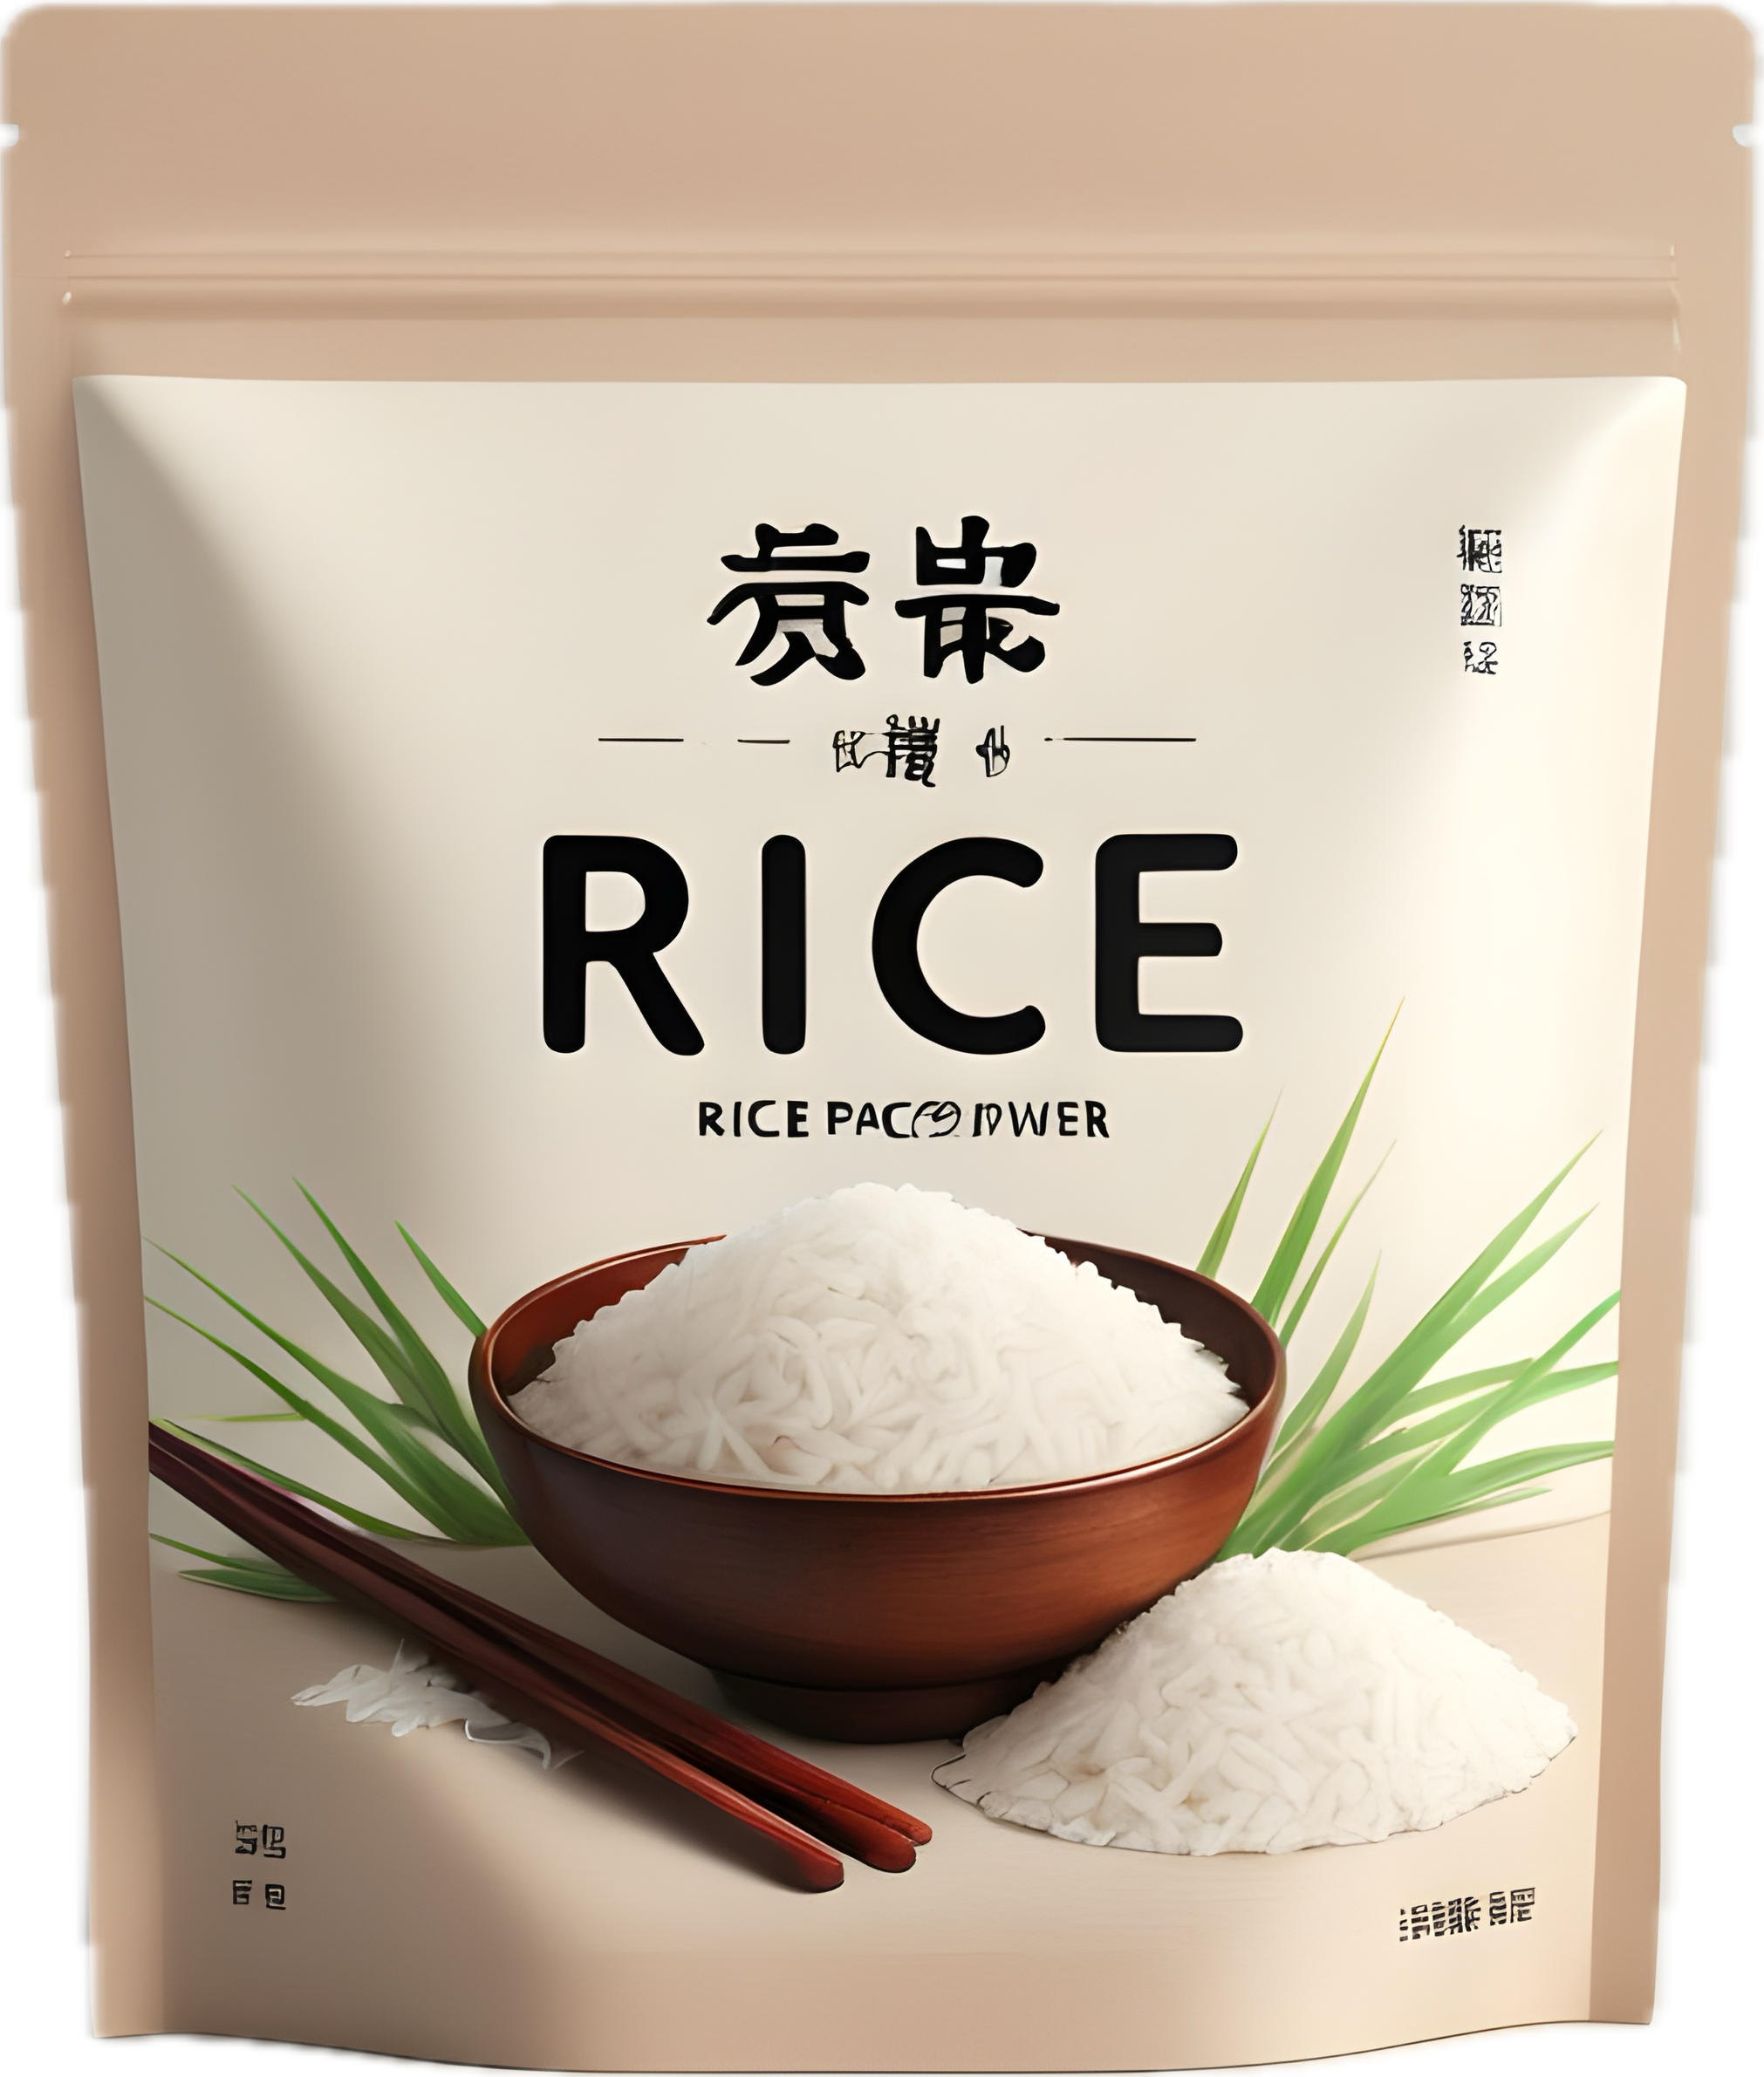 Free PNG Download: Rice Package Image